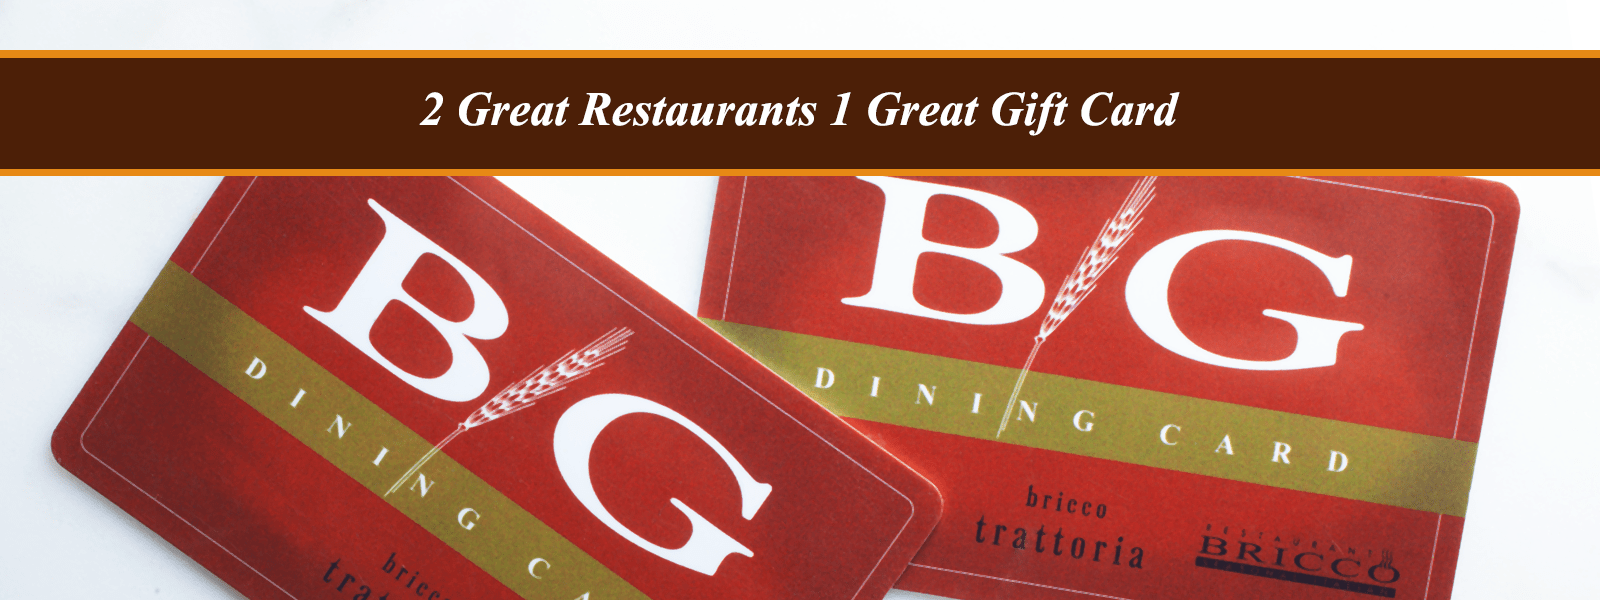 Restaurant Bricco and Bricco Trattoria Gift Cards from Billy Grant